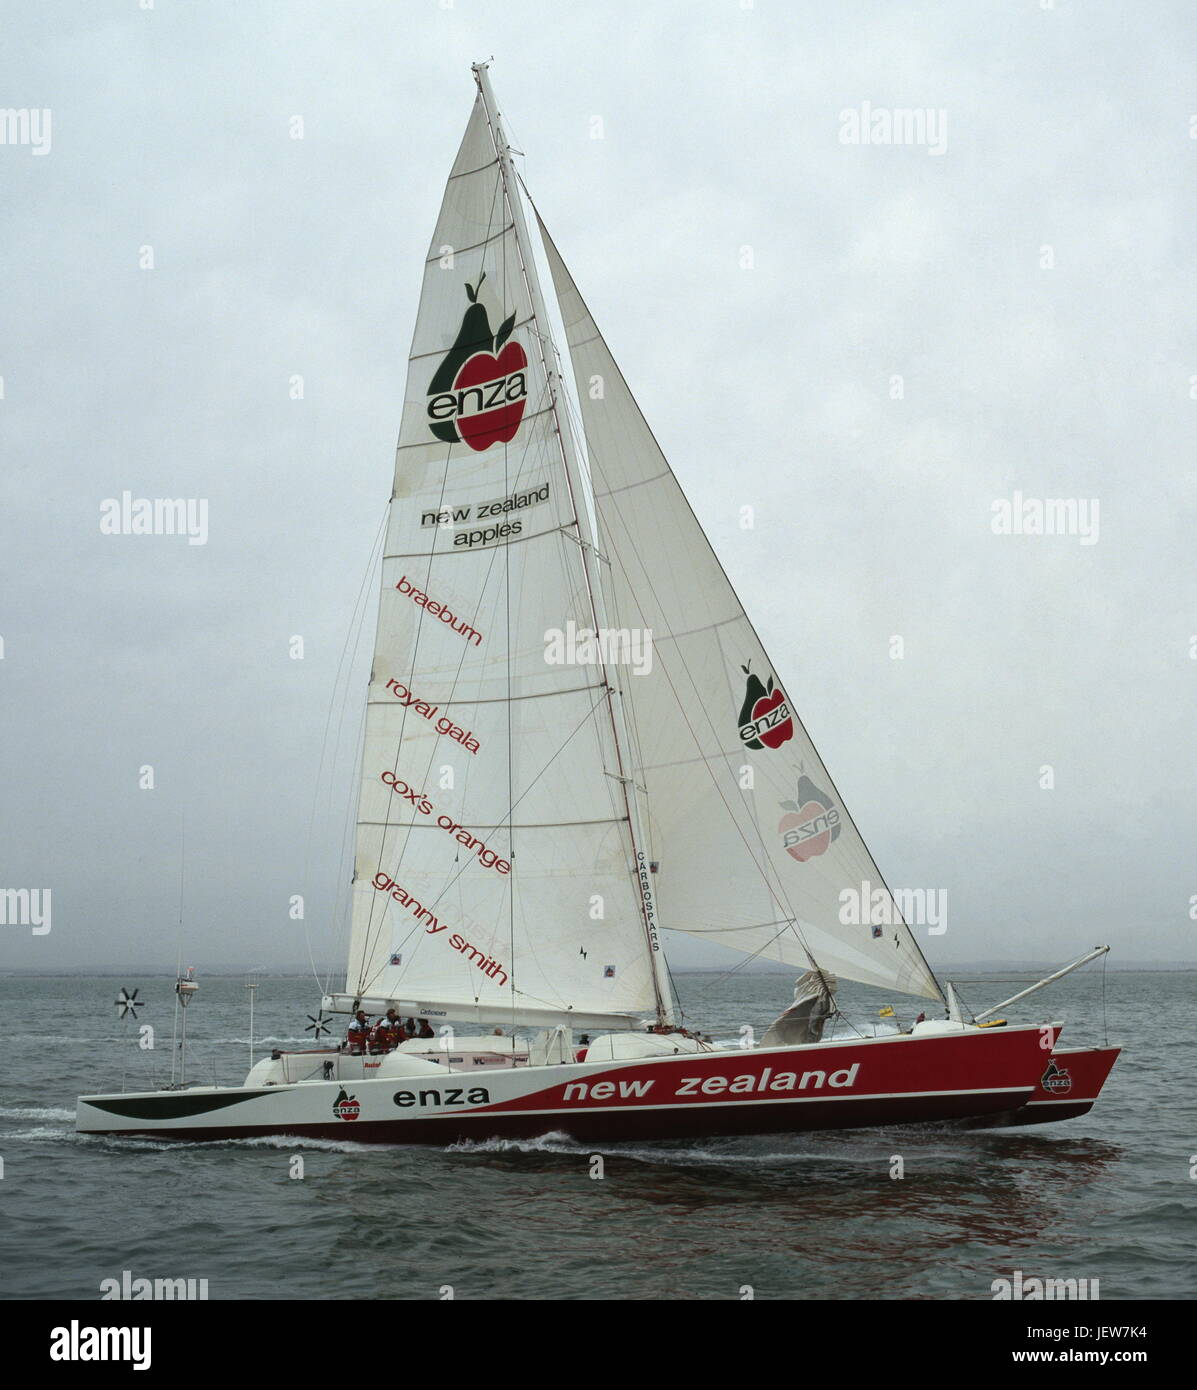 AJAXNETPHOTO. 1993 - SOLENT, ENGLAND - NEW CAT ON SEA TRIALS - ENZA - NEW ZEALAND, SKIPPERED BY ROBIN KNOX JOHNSTON AND PETER BLAKE UNDERGOING SEA TRIALS BEFORE THEIR RECORD CIRCUMNAVIGATION ATTEMPT. PHOTO:JONATHAN EASTLAND/AJAX REF:930072 Stock Photo